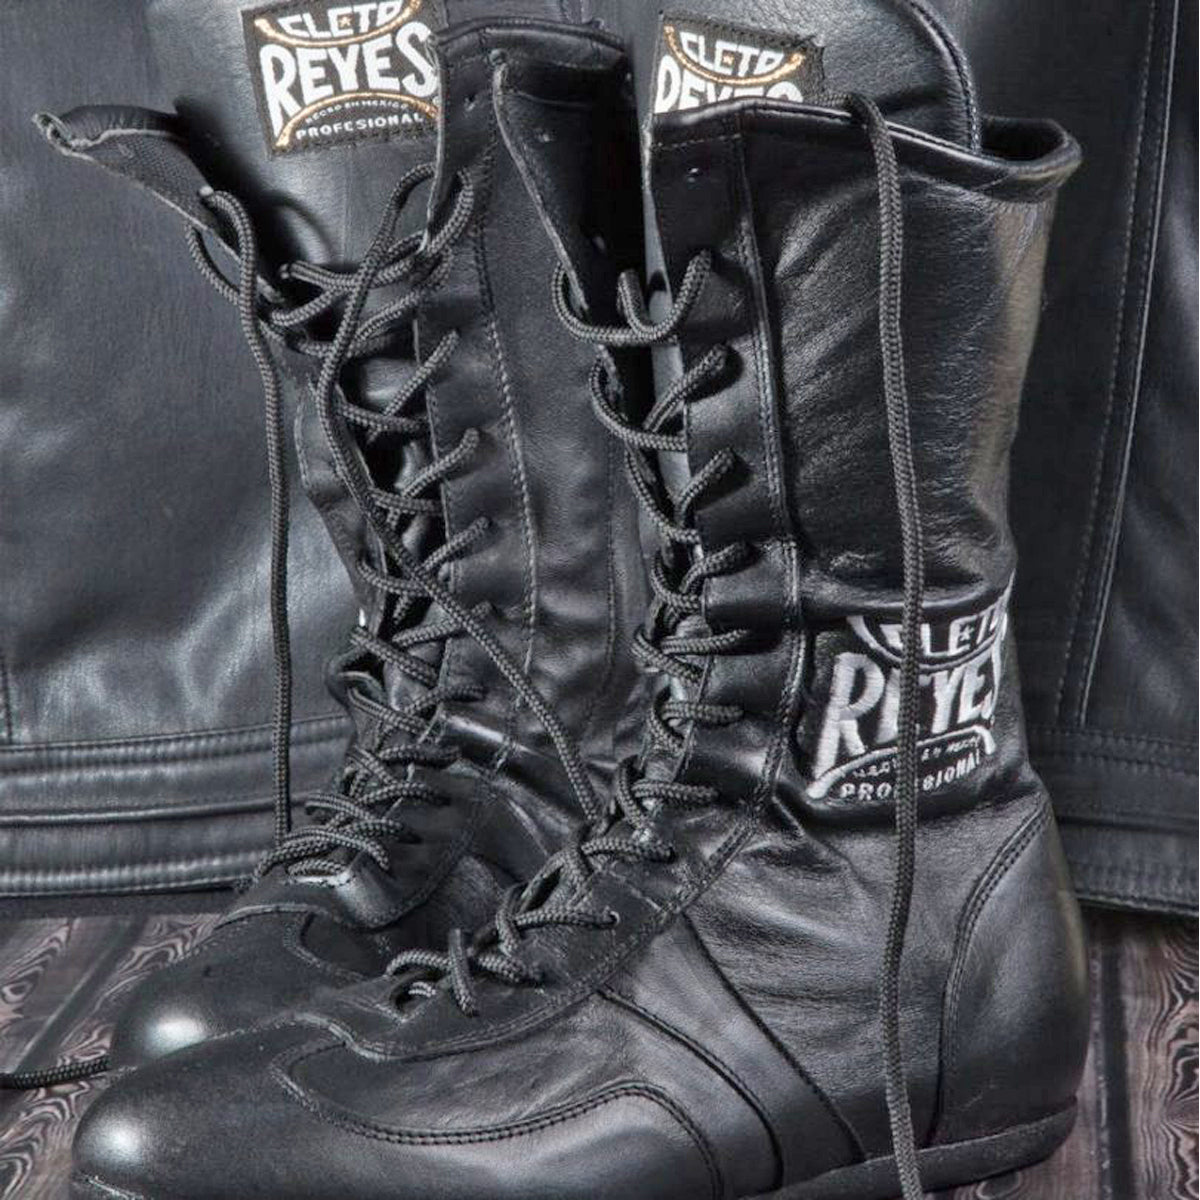 Cleto Reyes Leather Lace Up High Top Boxing Shoes Cleto Reyes